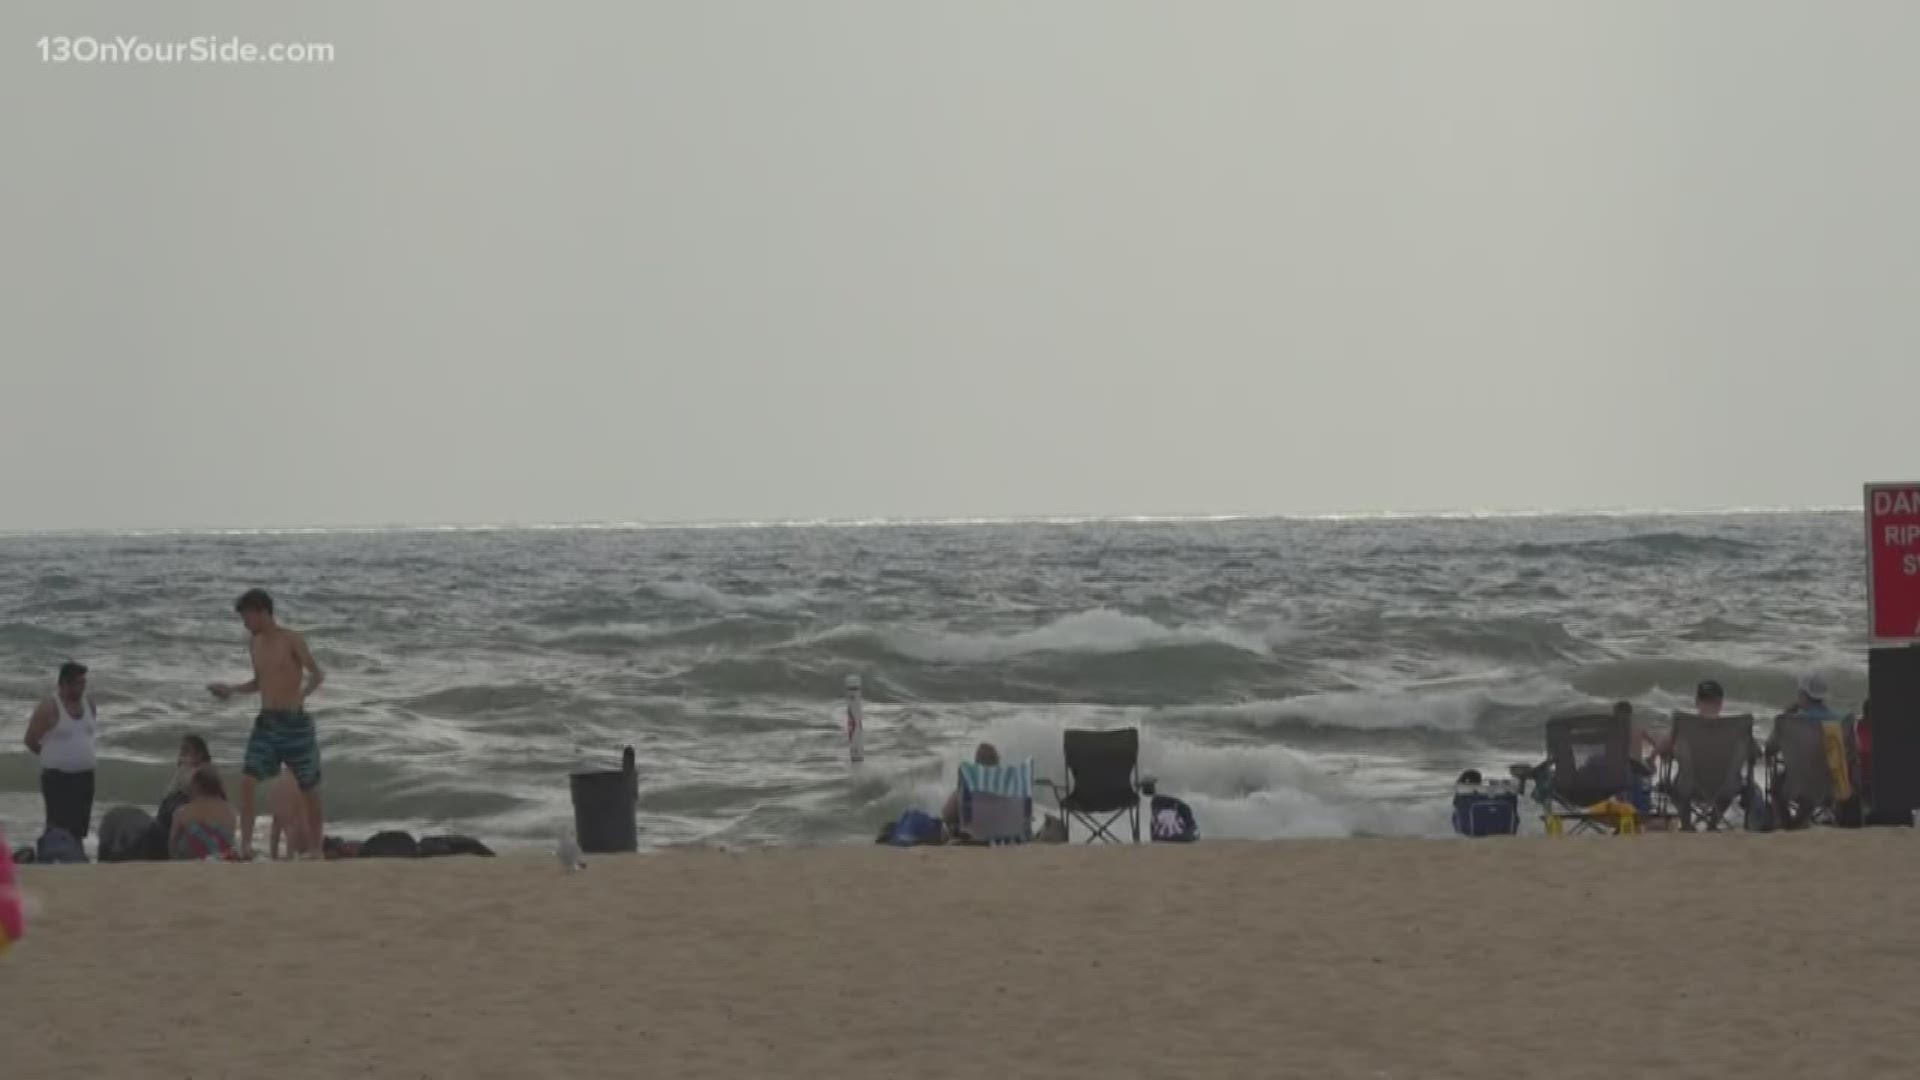 Dangerous swimming conditions at Grand Haven State Park for the opening weekend of Coast Guard Fest